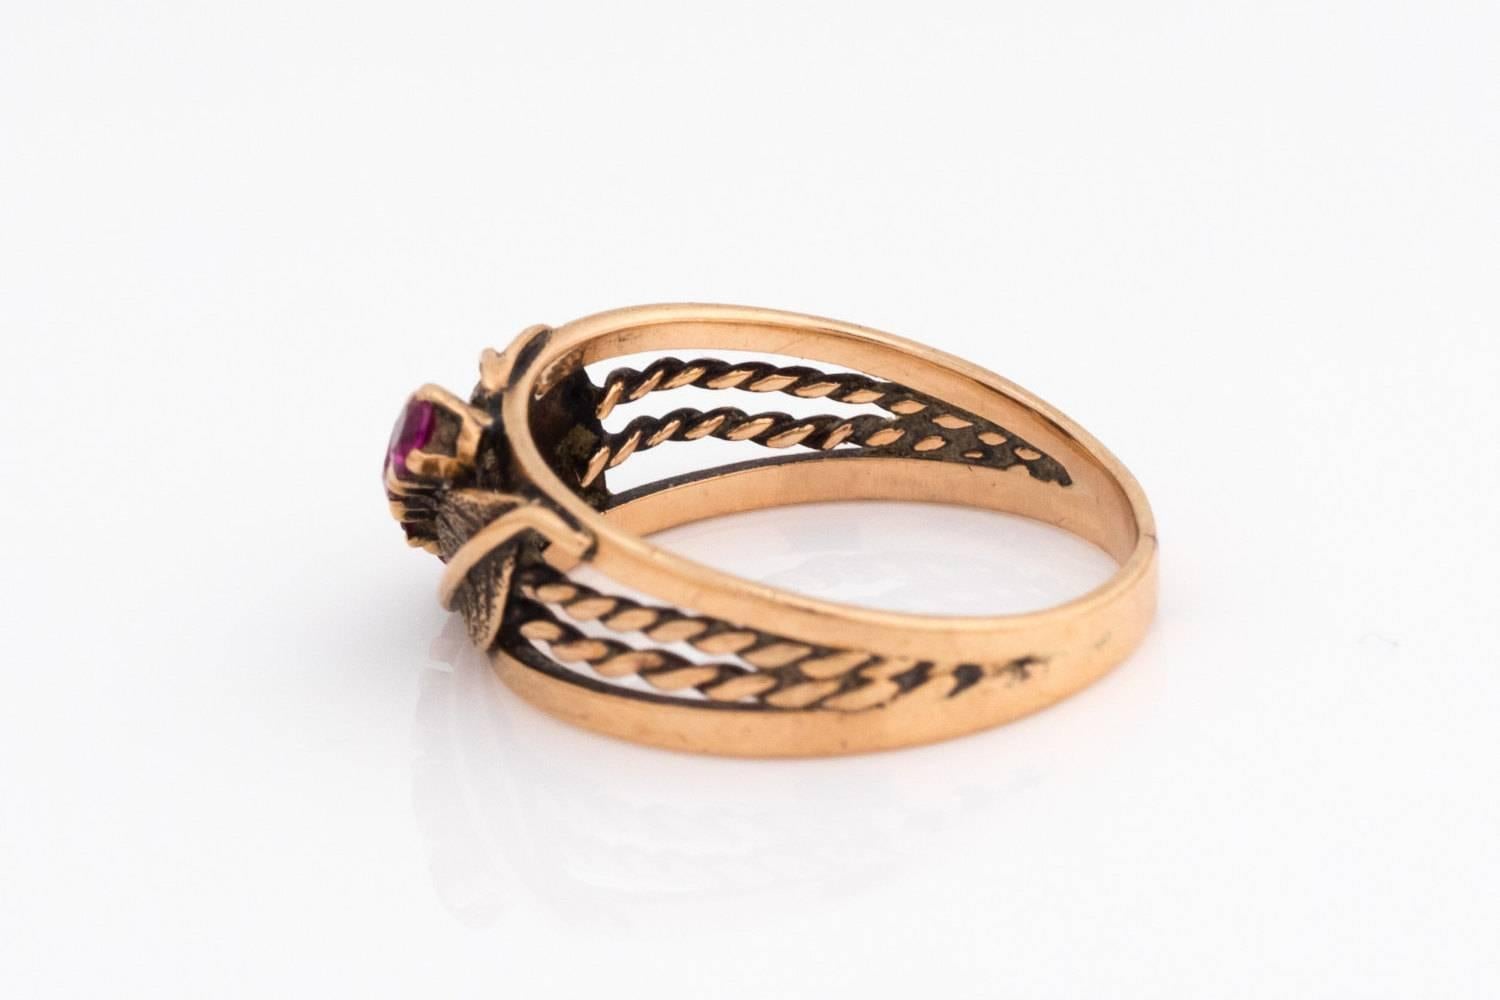 1920s Art Deco Ruby 14 Karat Rose Gold Ring with Elegant Floral Pattern
Stunning Color play between Rose Gold and Magenta Rubies 
Two-Leaf Design Borders Four Linear Placed Simulated Rubies
Braided Double Wire Rope Design Builds up towards the